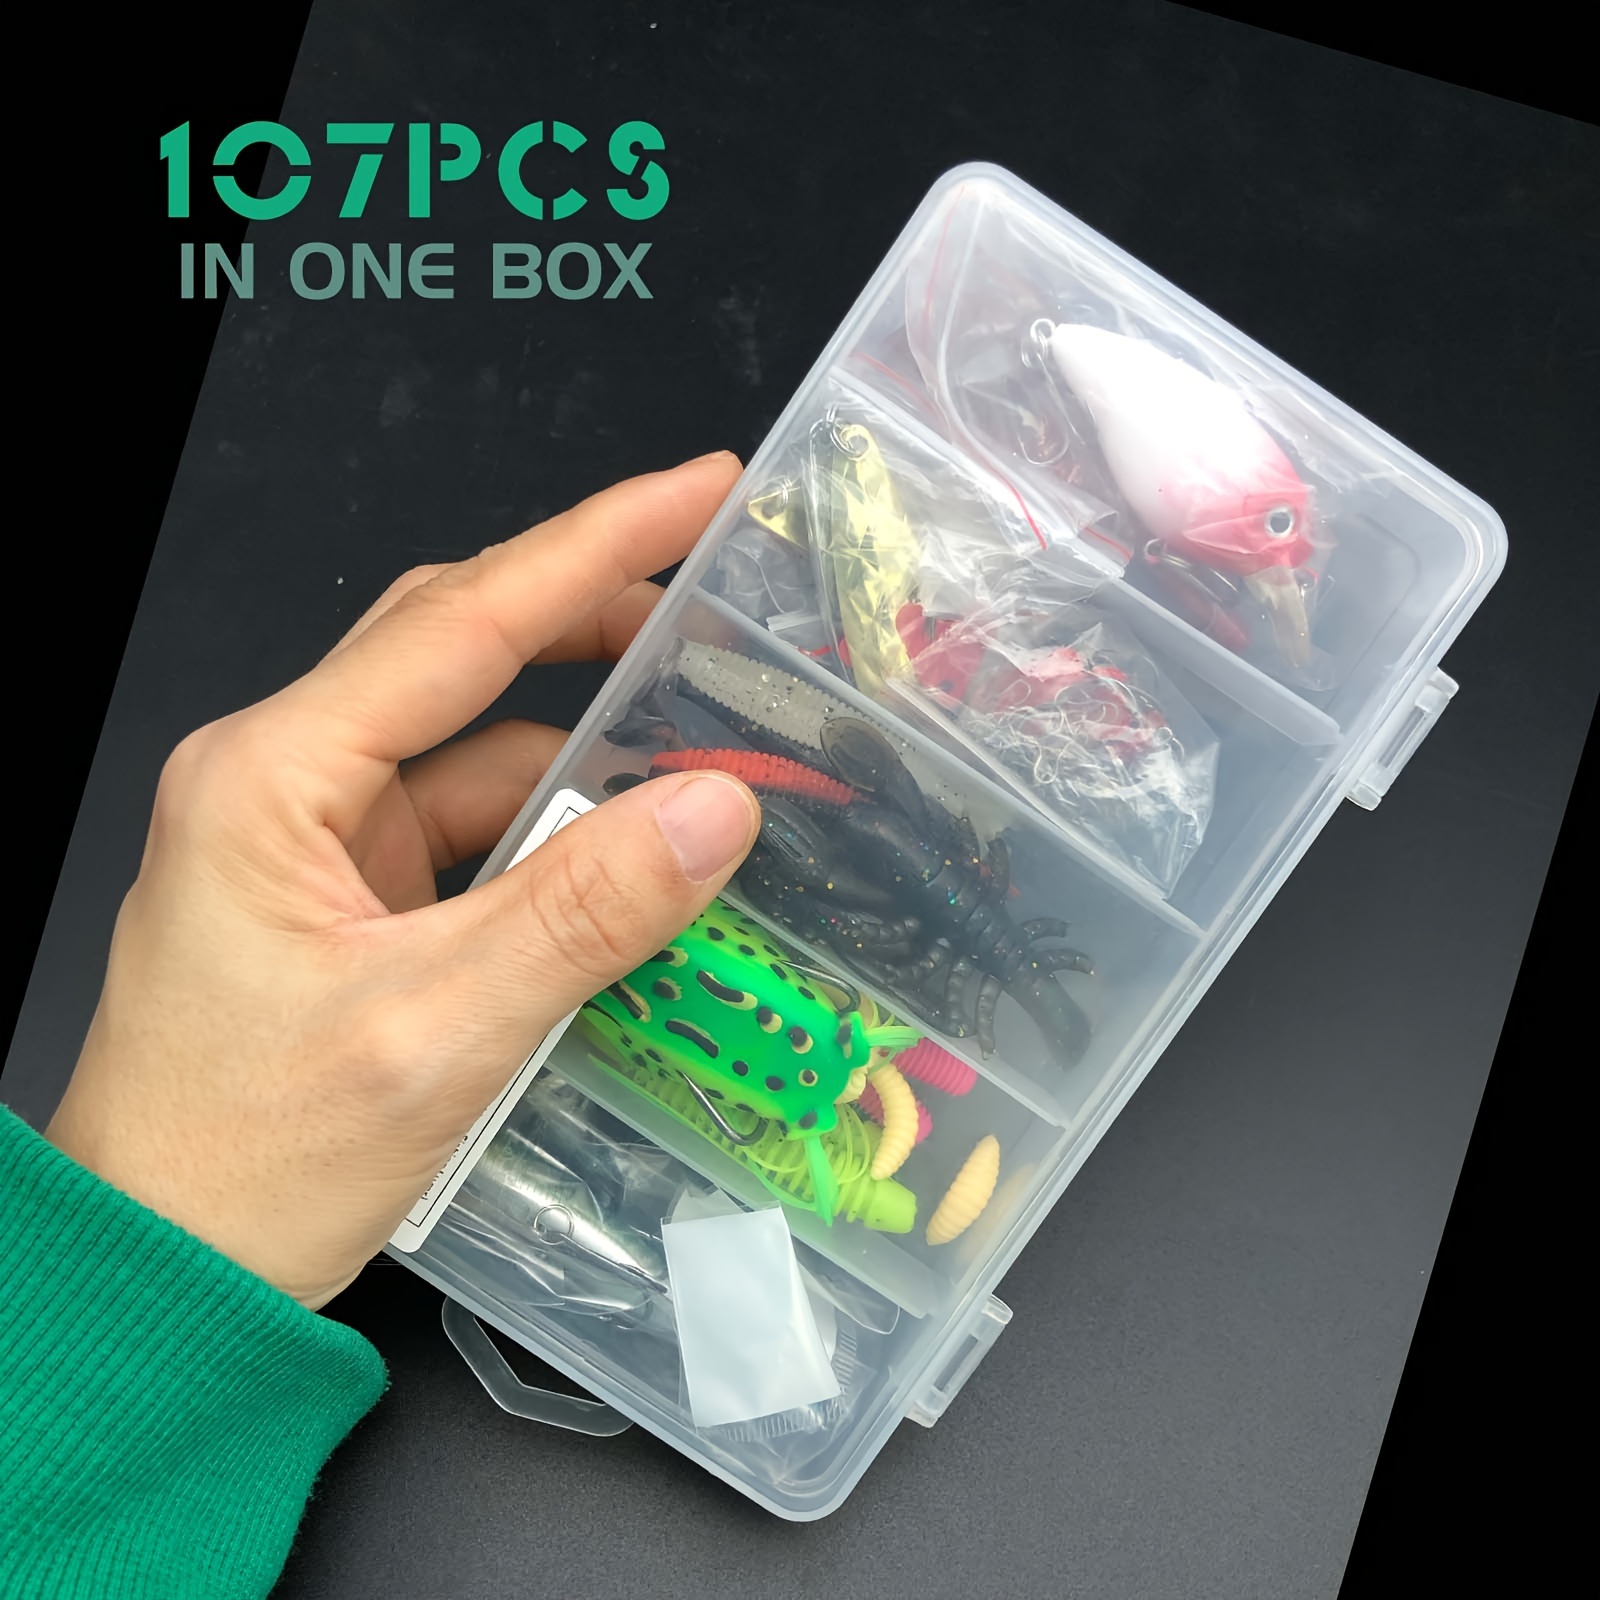 26 107 132 284pcs fishing lures kit tackle box with hard lures spoon lures soft plastic worms swimbaits crankbait jigs hooks for bass trout salmon fishing details 9